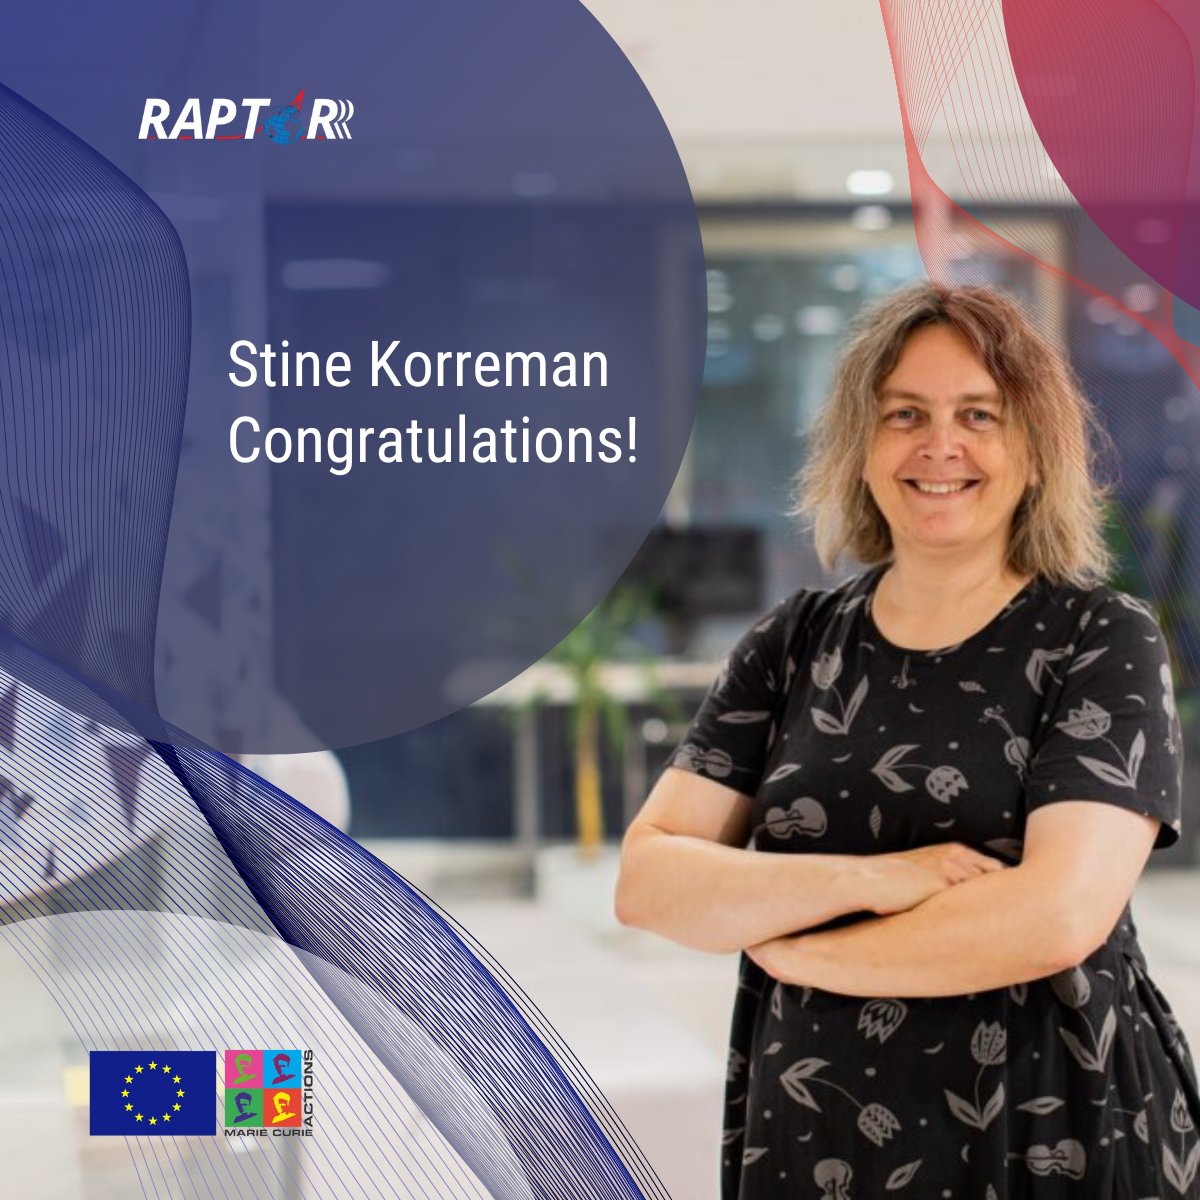 Exciting news from RAPTOR! 🌟 📢 We're delighted to announce that @stinekorreman, one of the exceptional supervisors in the EU RAPTOR project, has been awarded the JCD prize for 'Best Supervisor' by her university! 🏆 Congratulations, Stine! 🎉